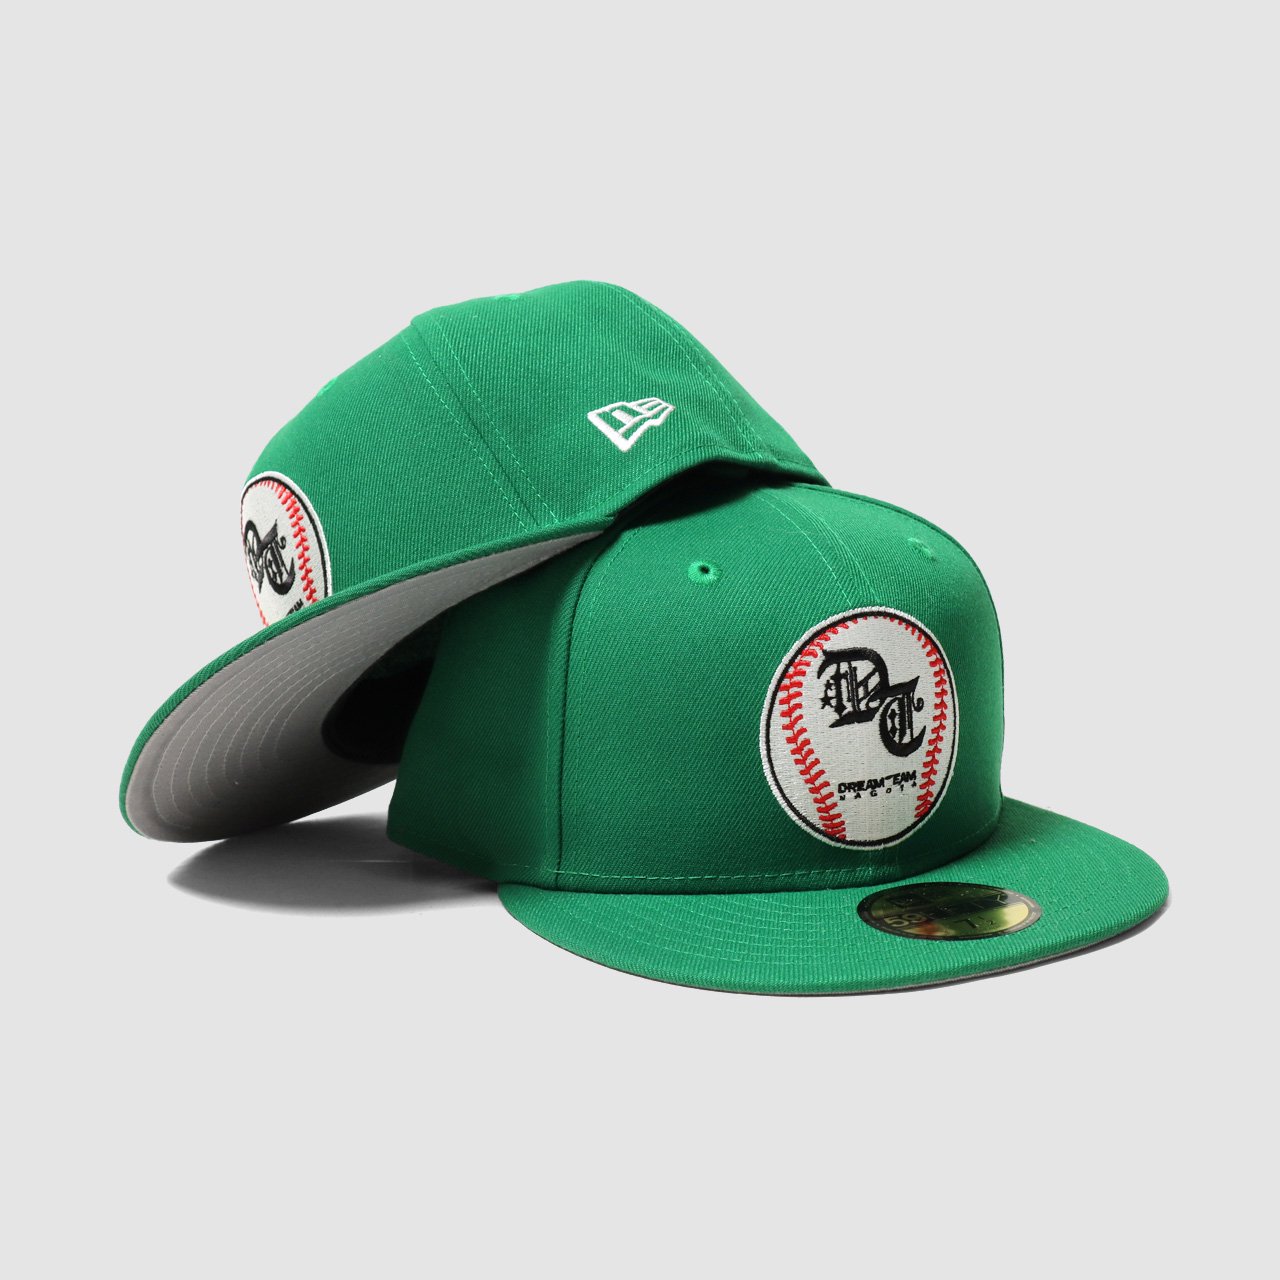 【Revival】DREAMTEAM BB Logo New Era 59Fifty Fitted Cap Kelly Green
